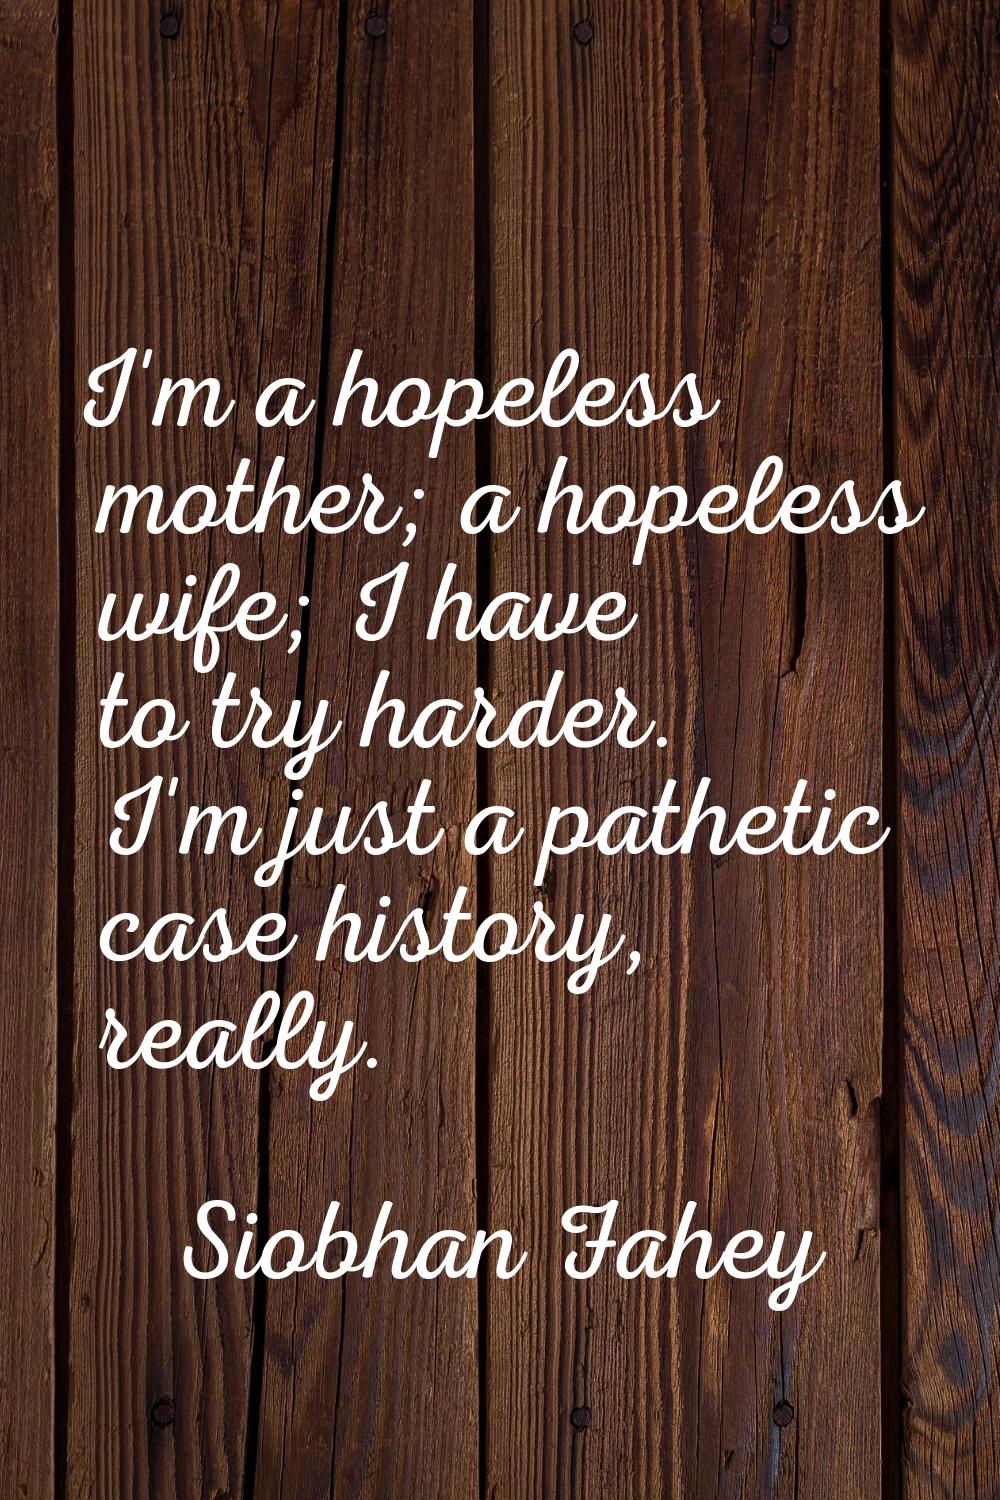 I'm a hopeless mother; a hopeless wife; I have to try harder. I'm just a pathetic case history, rea